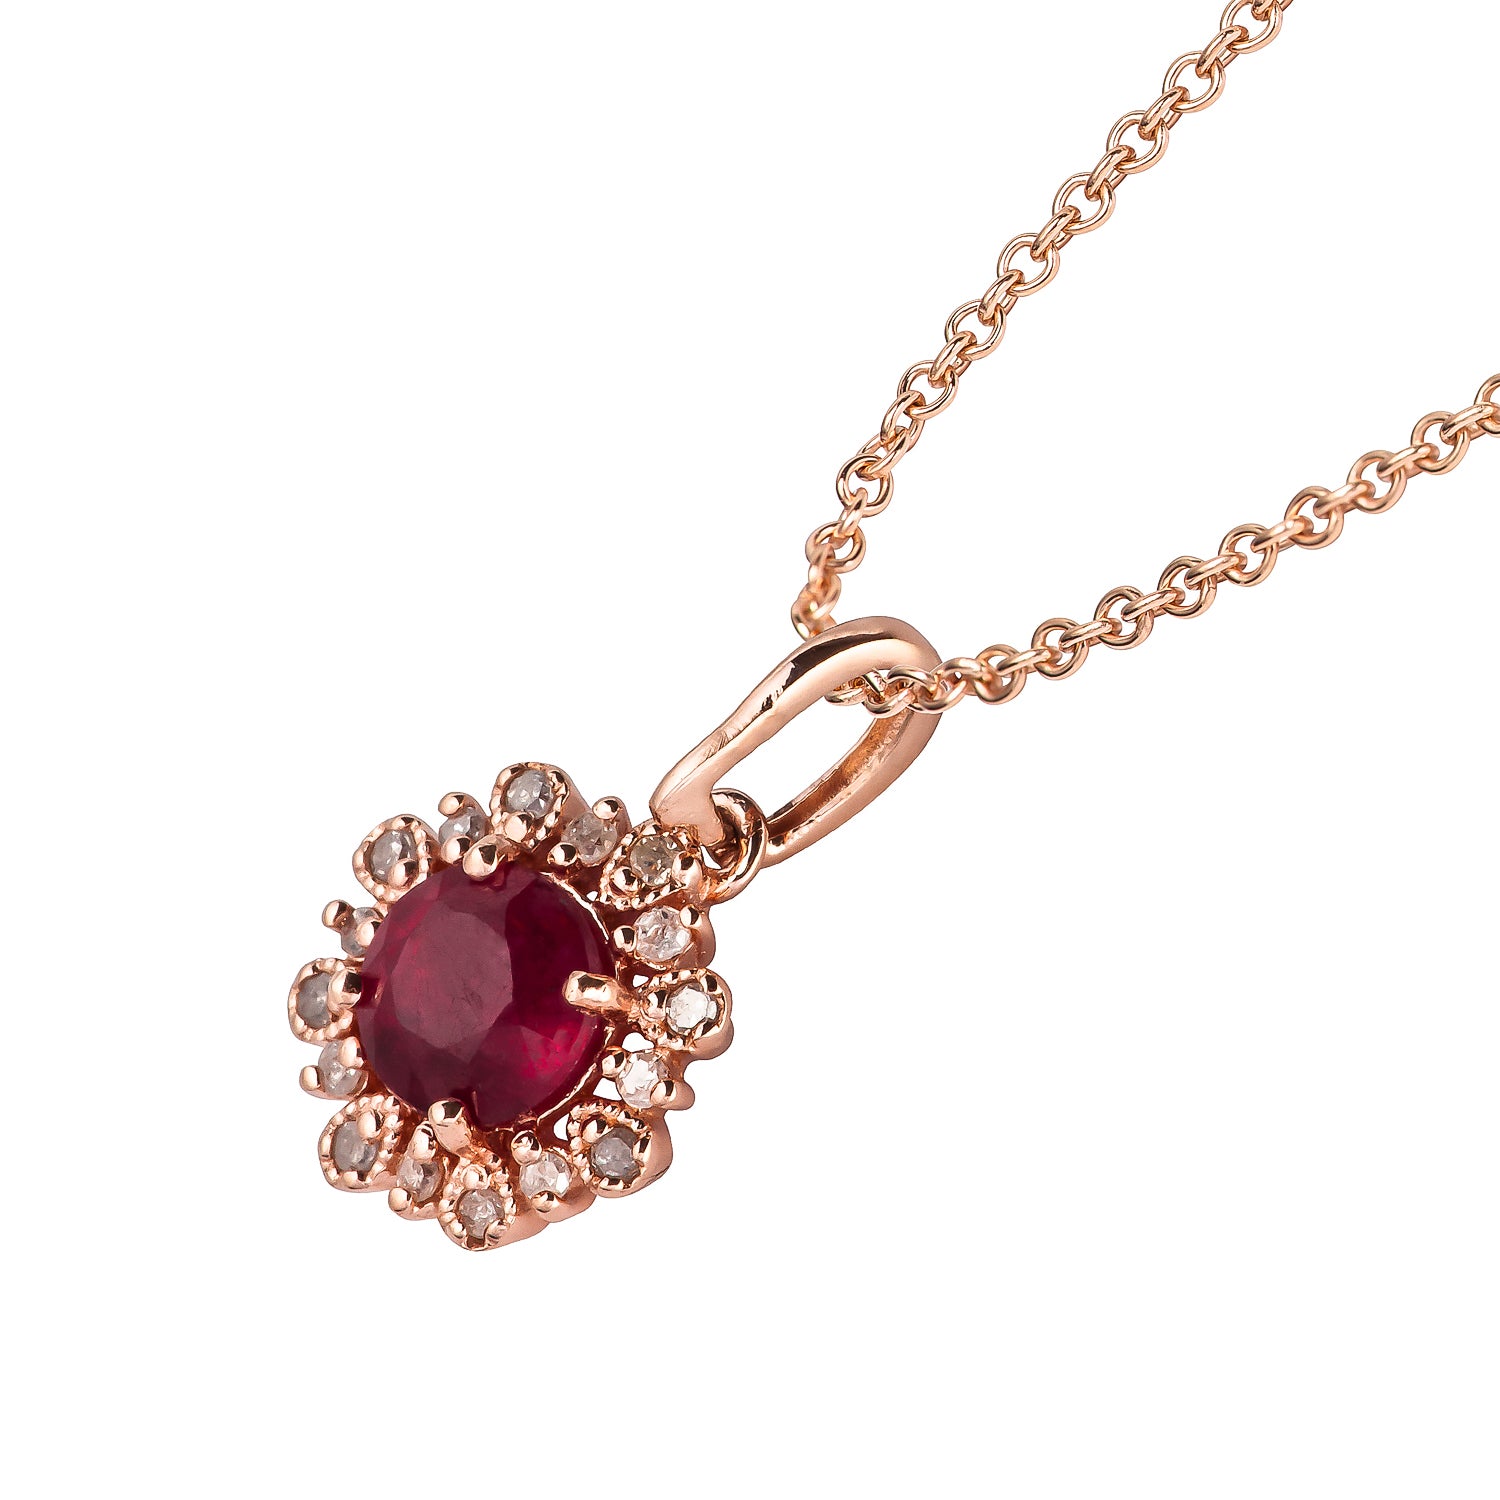 0.48 tcw Ruby Pendant Yellow Gold - Necklace with pendant - Catawiki